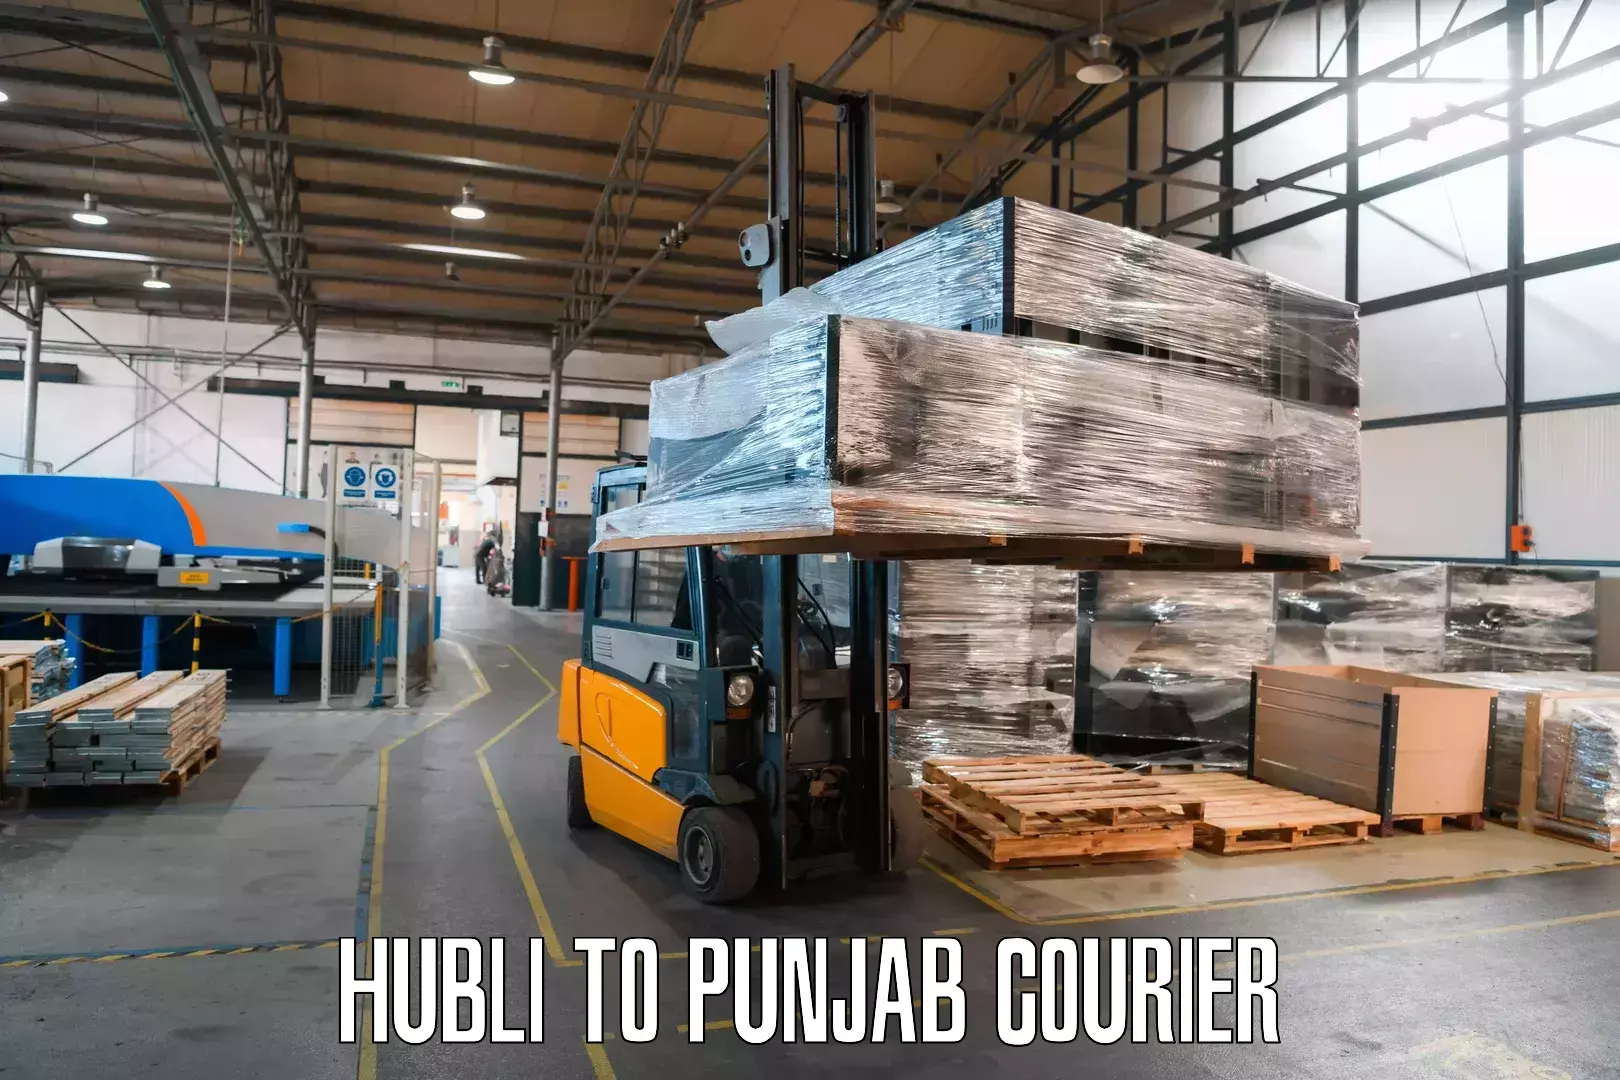 Reliable courier service in Hubli to Begowal